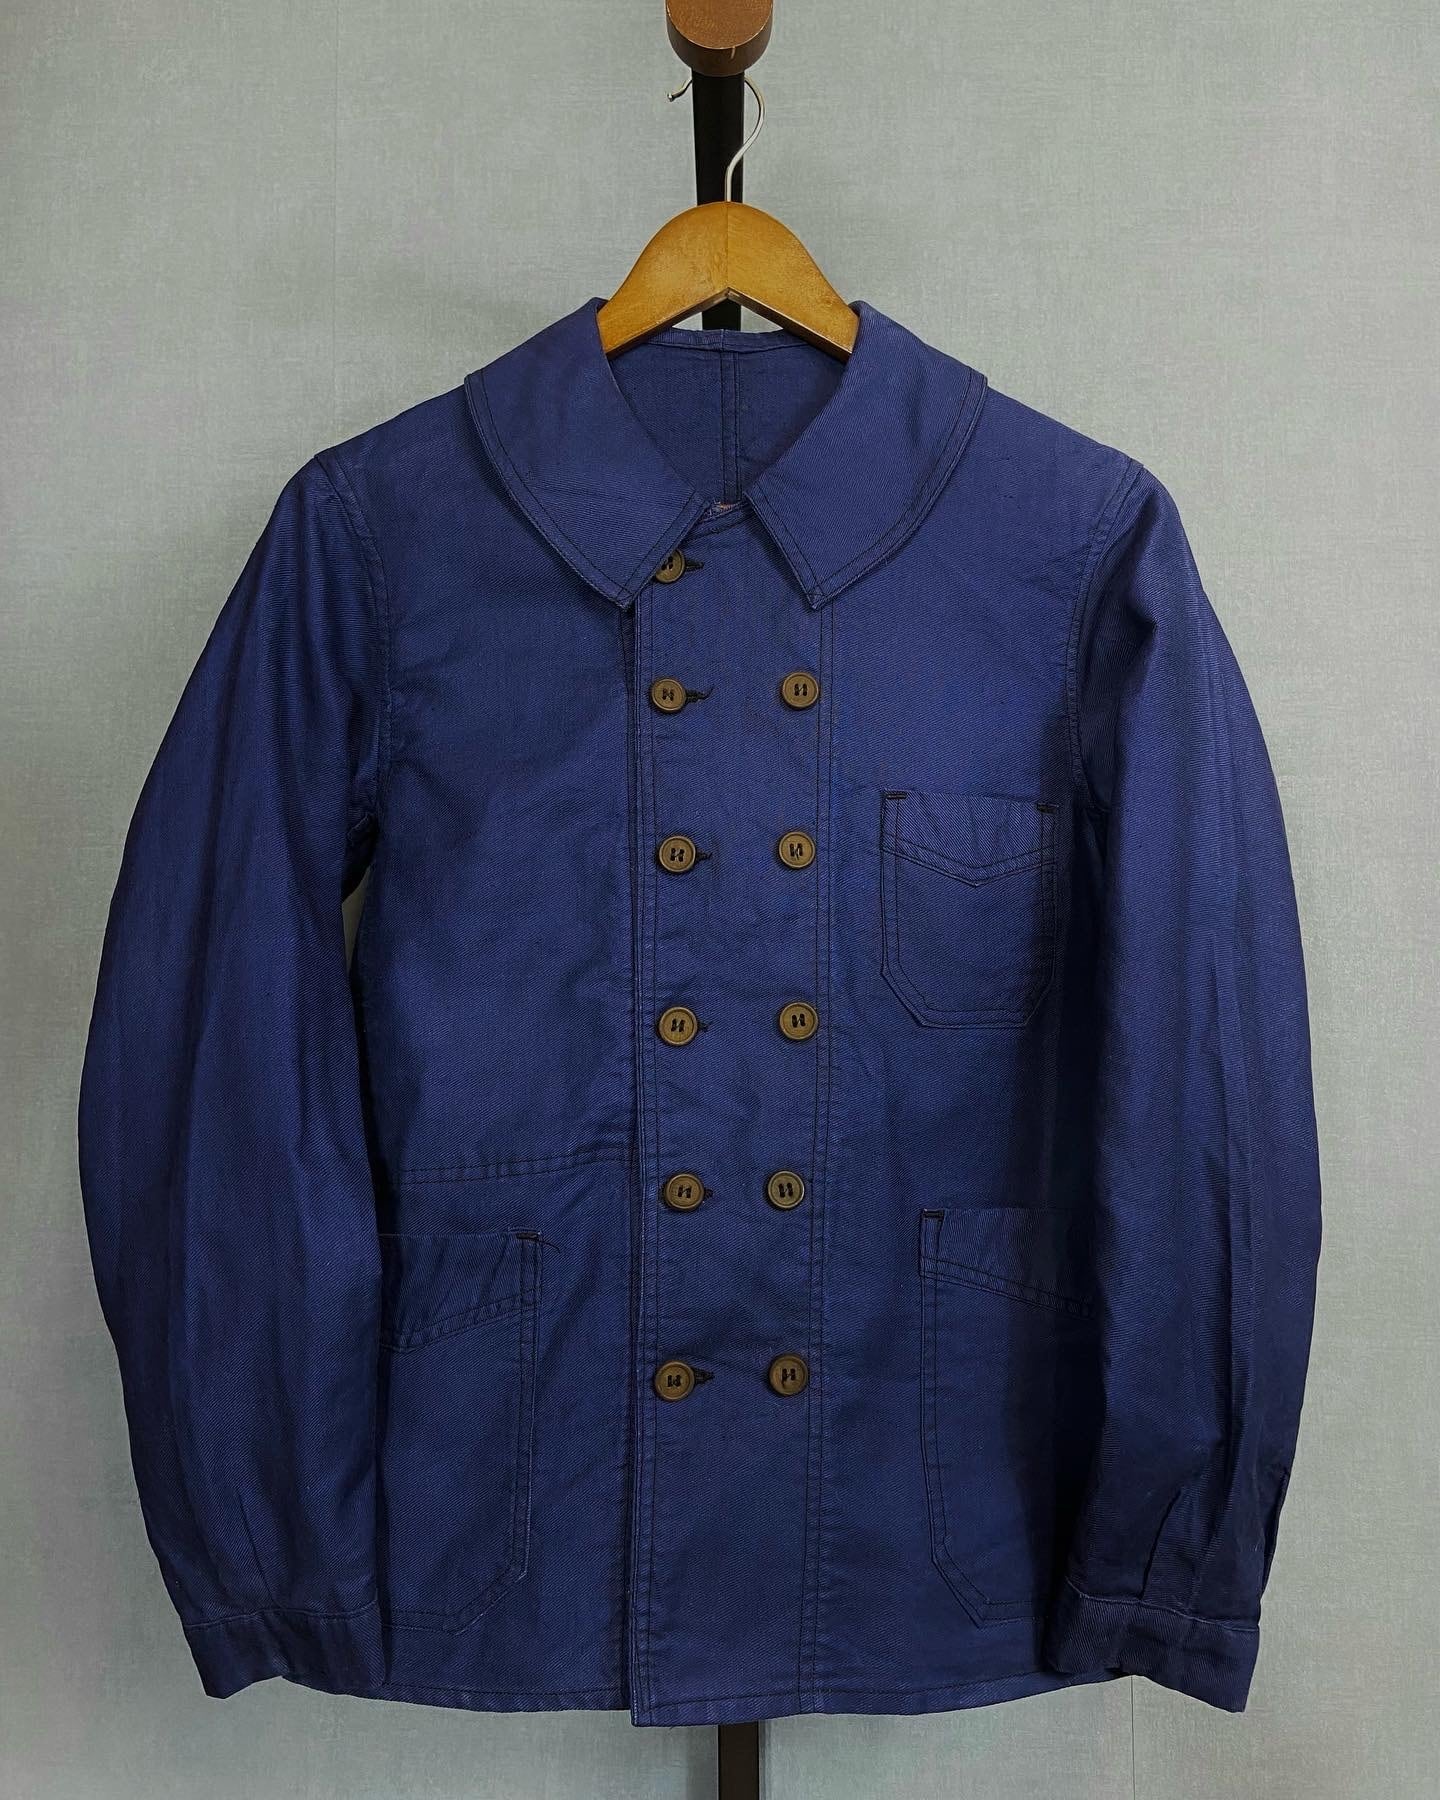 1930s】French Work Cotton Twill Double Breasted Jacket, with All